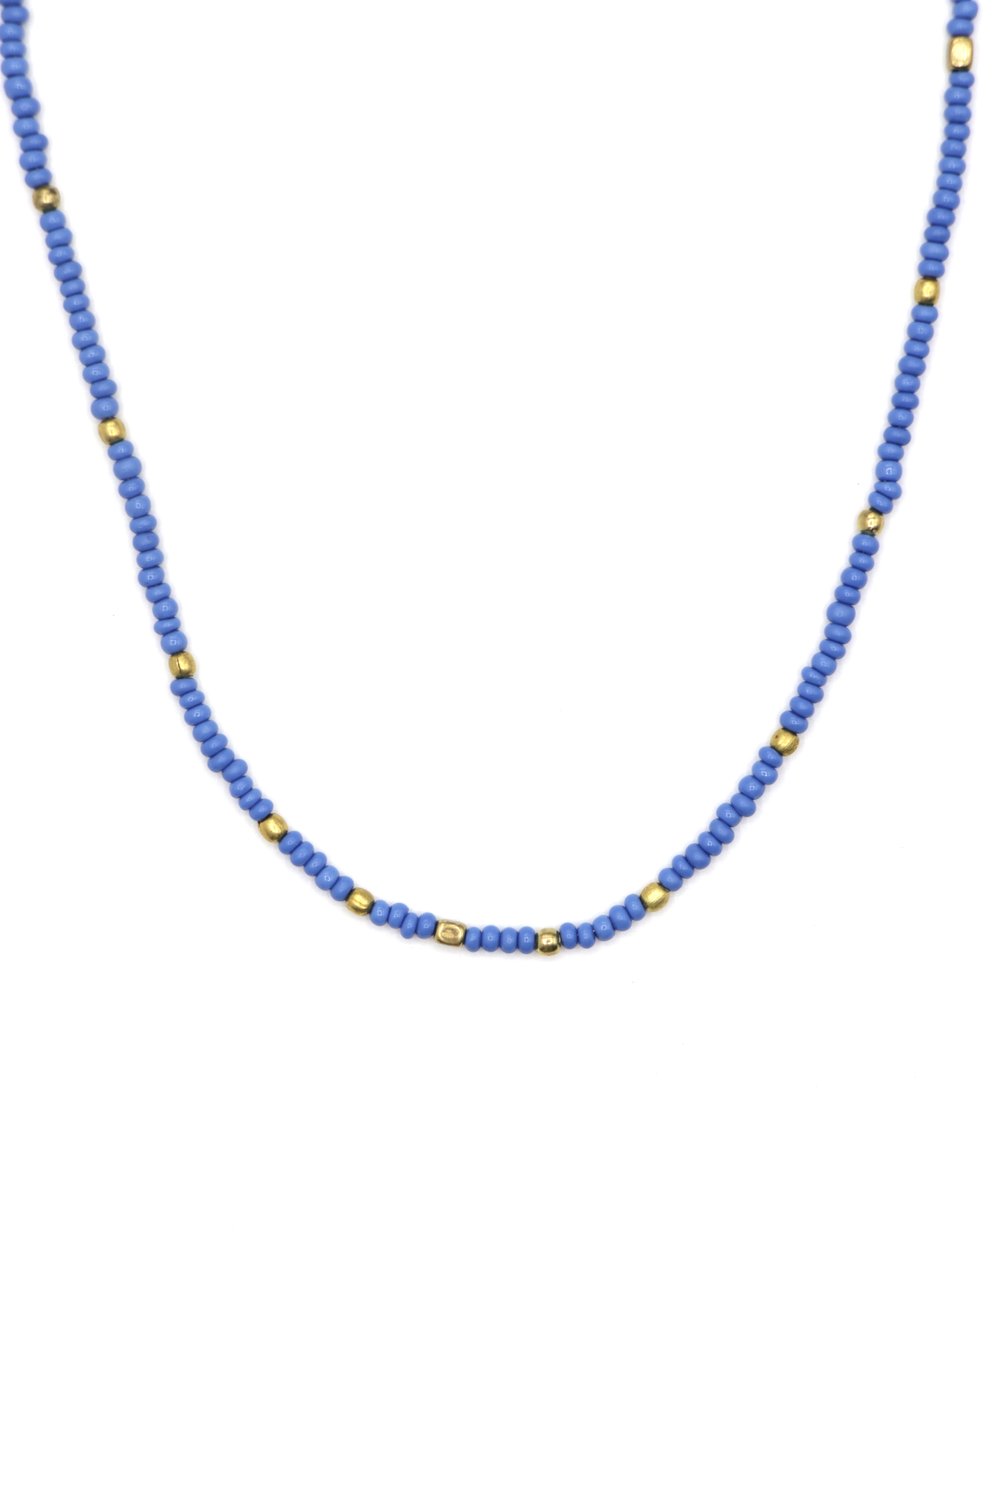 17-20" Vintage Blue and Brass Beaded Necklace